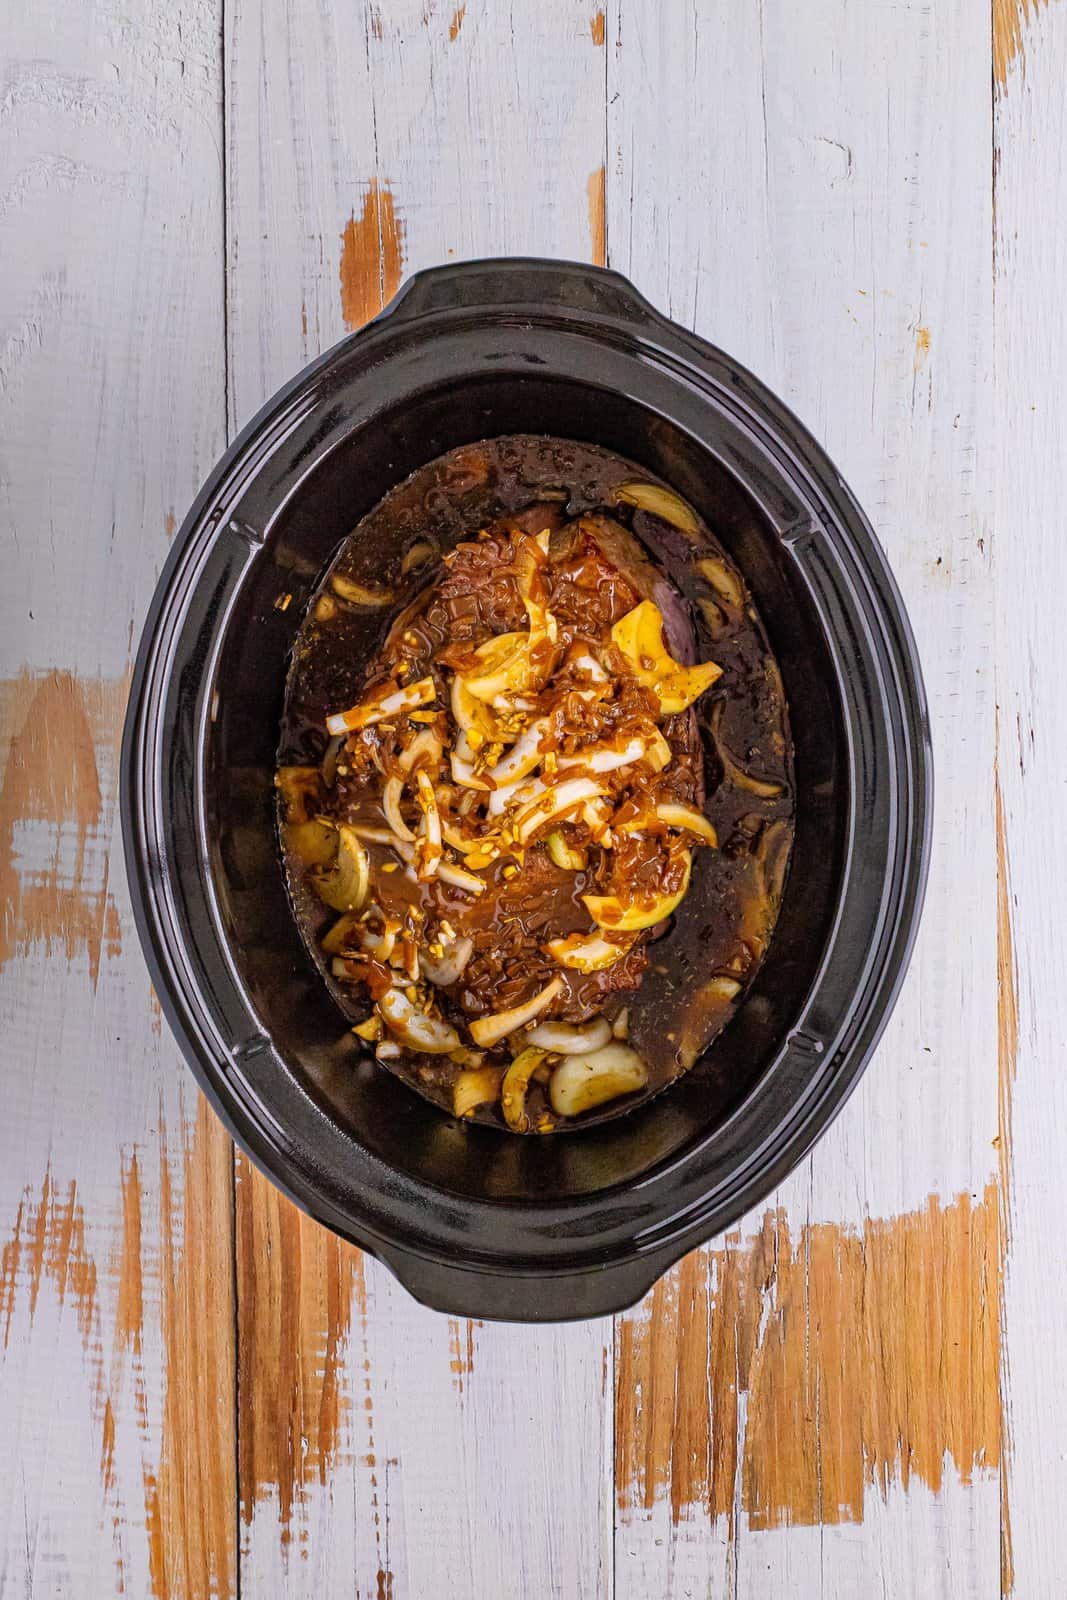 Looking down on a slow cooker with pot roast, condensed soups, onions, and herbs and spices.